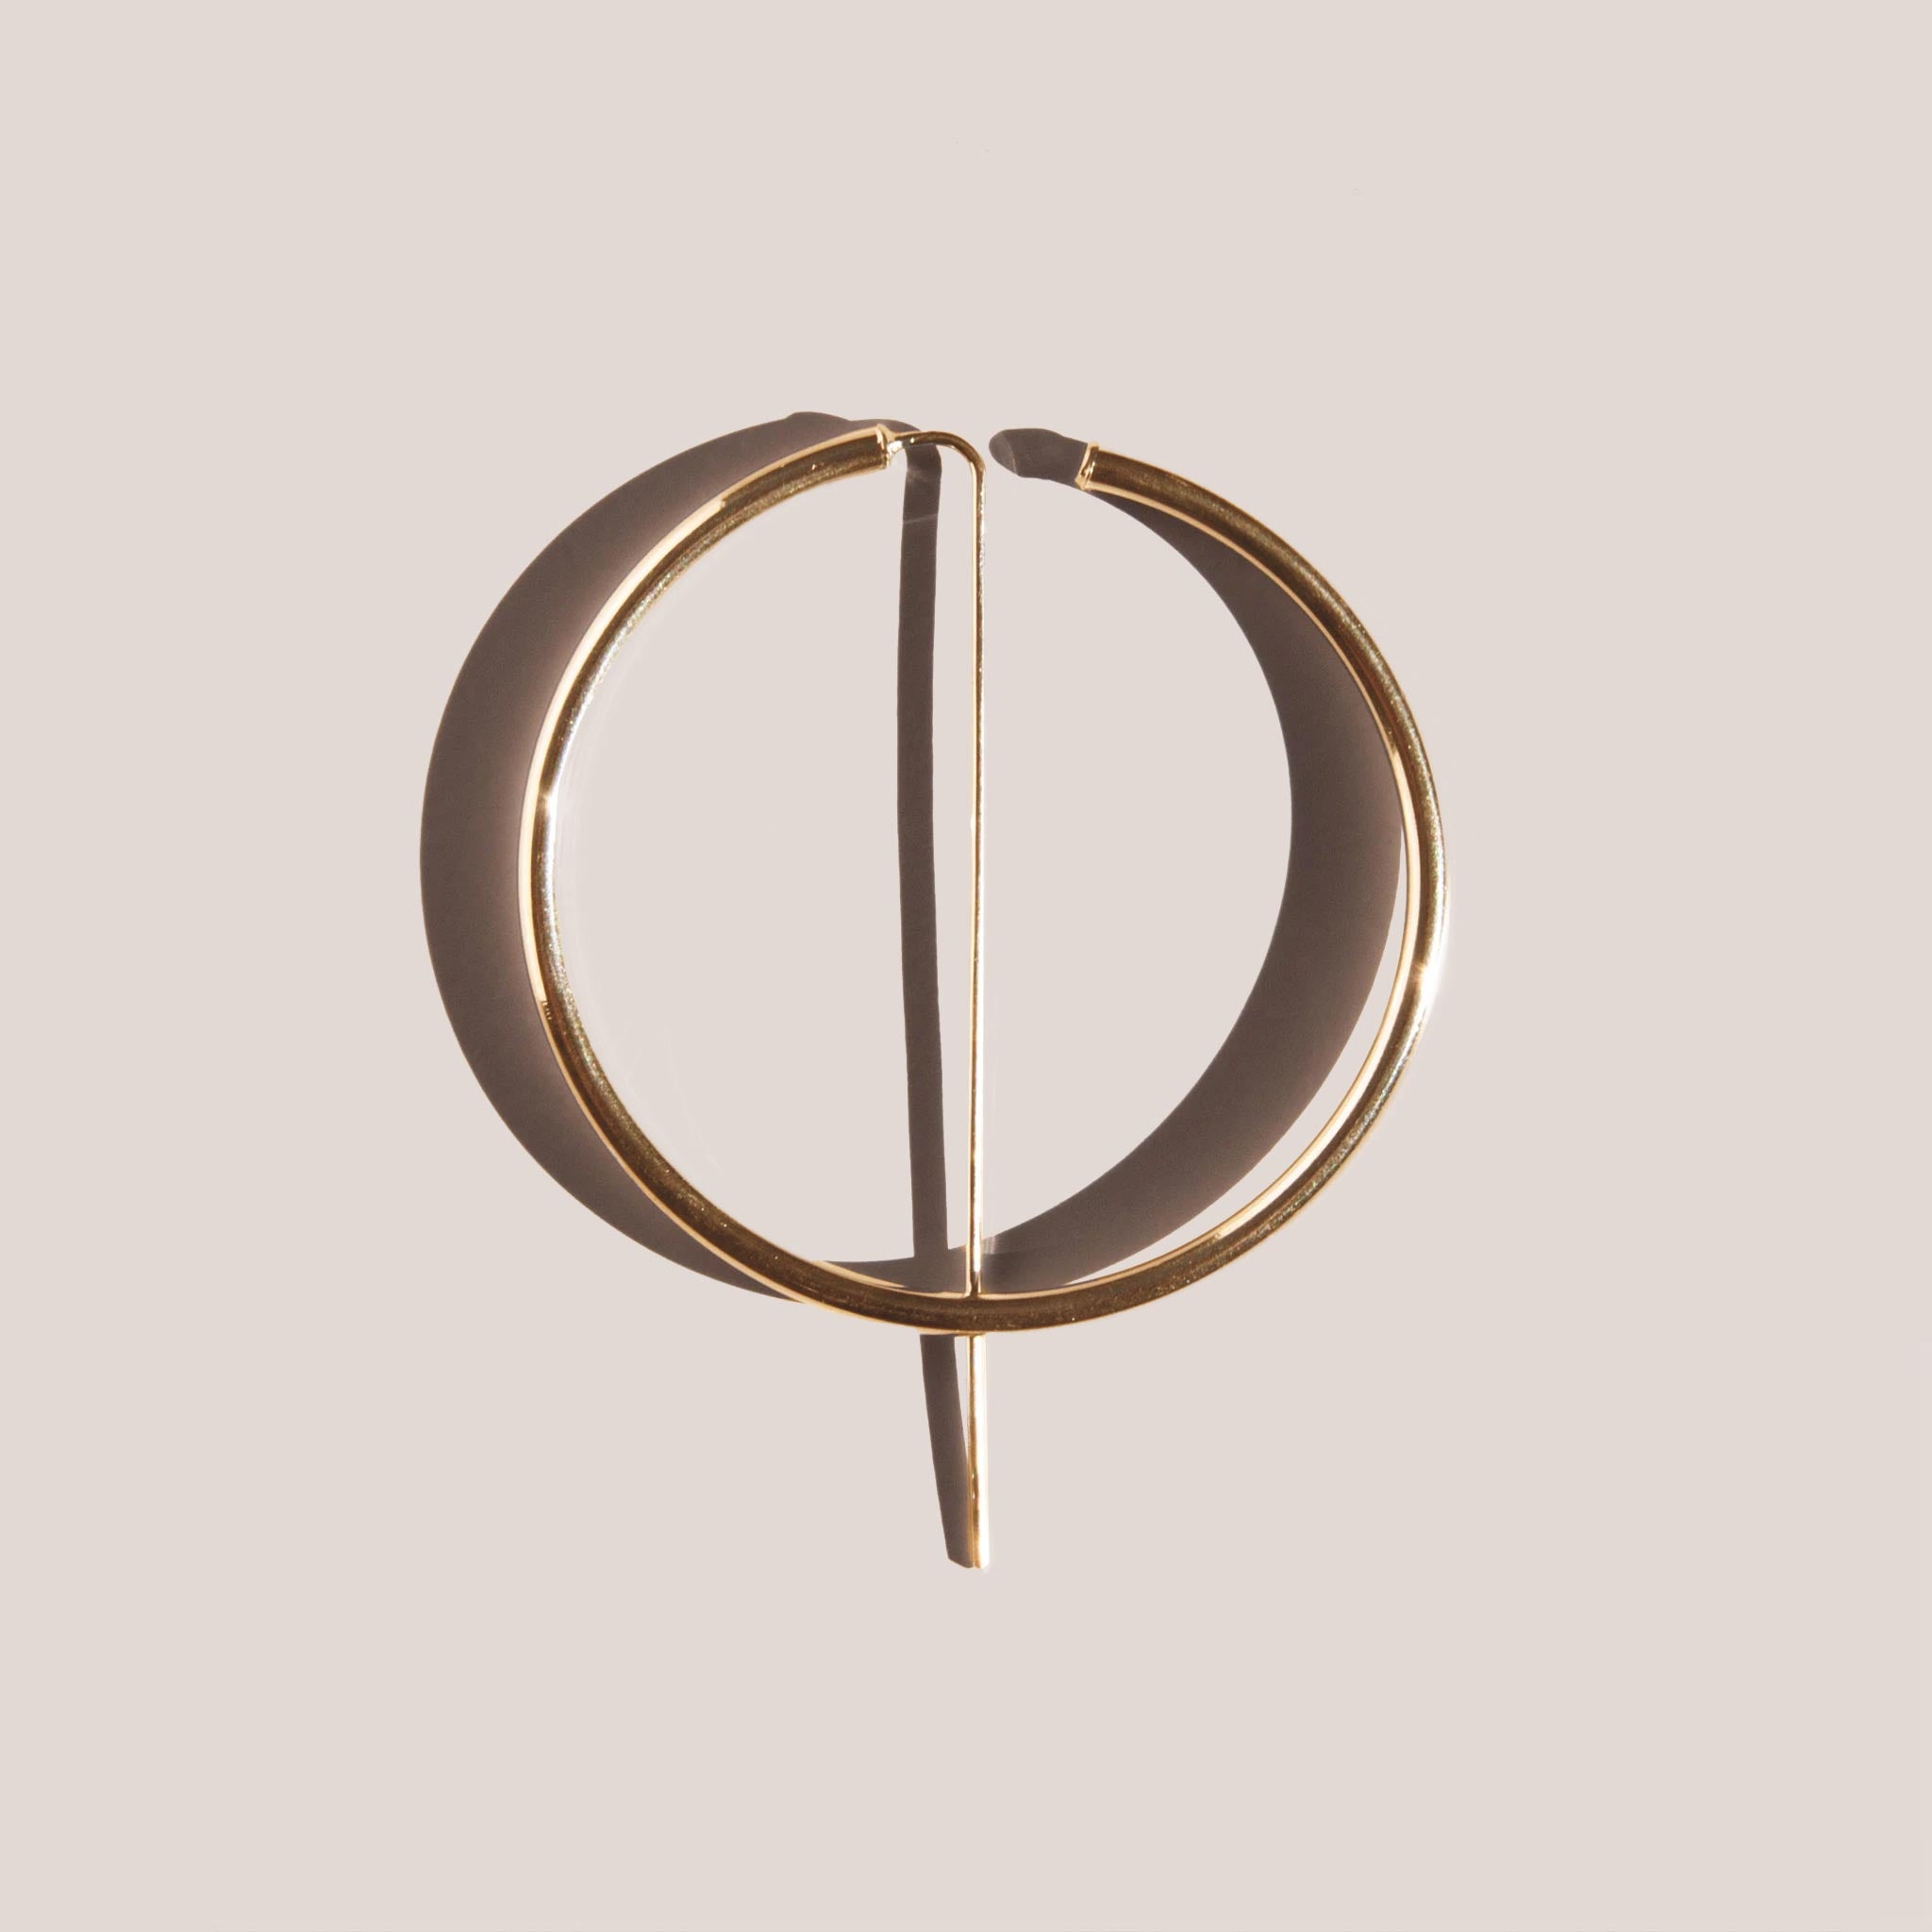 Jaclyn Moran - Oversized Hoop & Post Earrings in Yellow Gold, available at LCD.